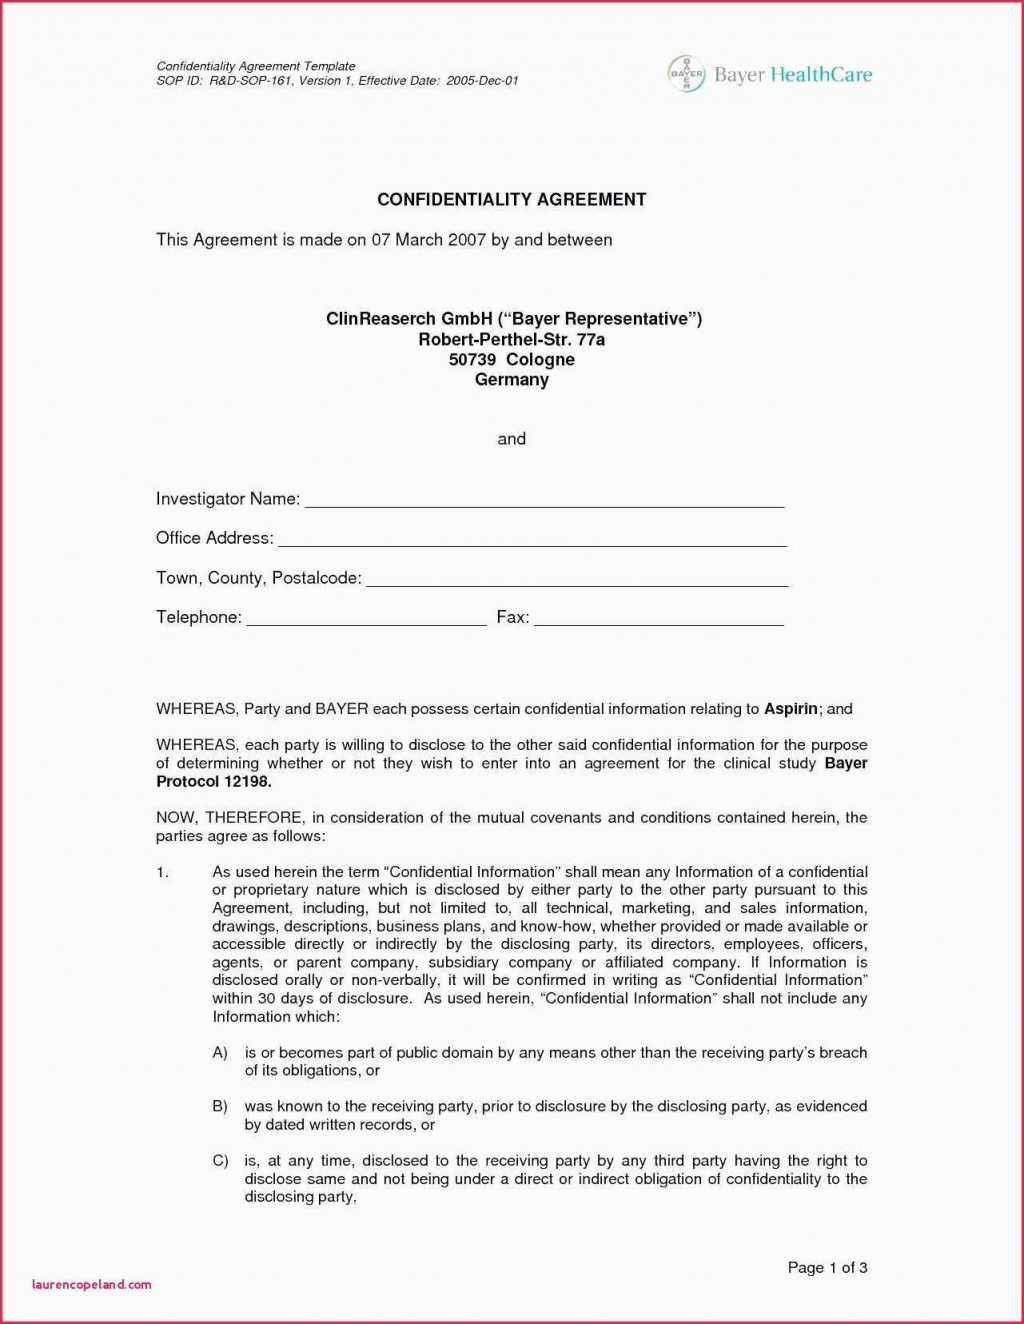 023 Confidentiality Agreement Template Free 20Non20Losure With Regard To Free Confidentiality Agreement Template Download